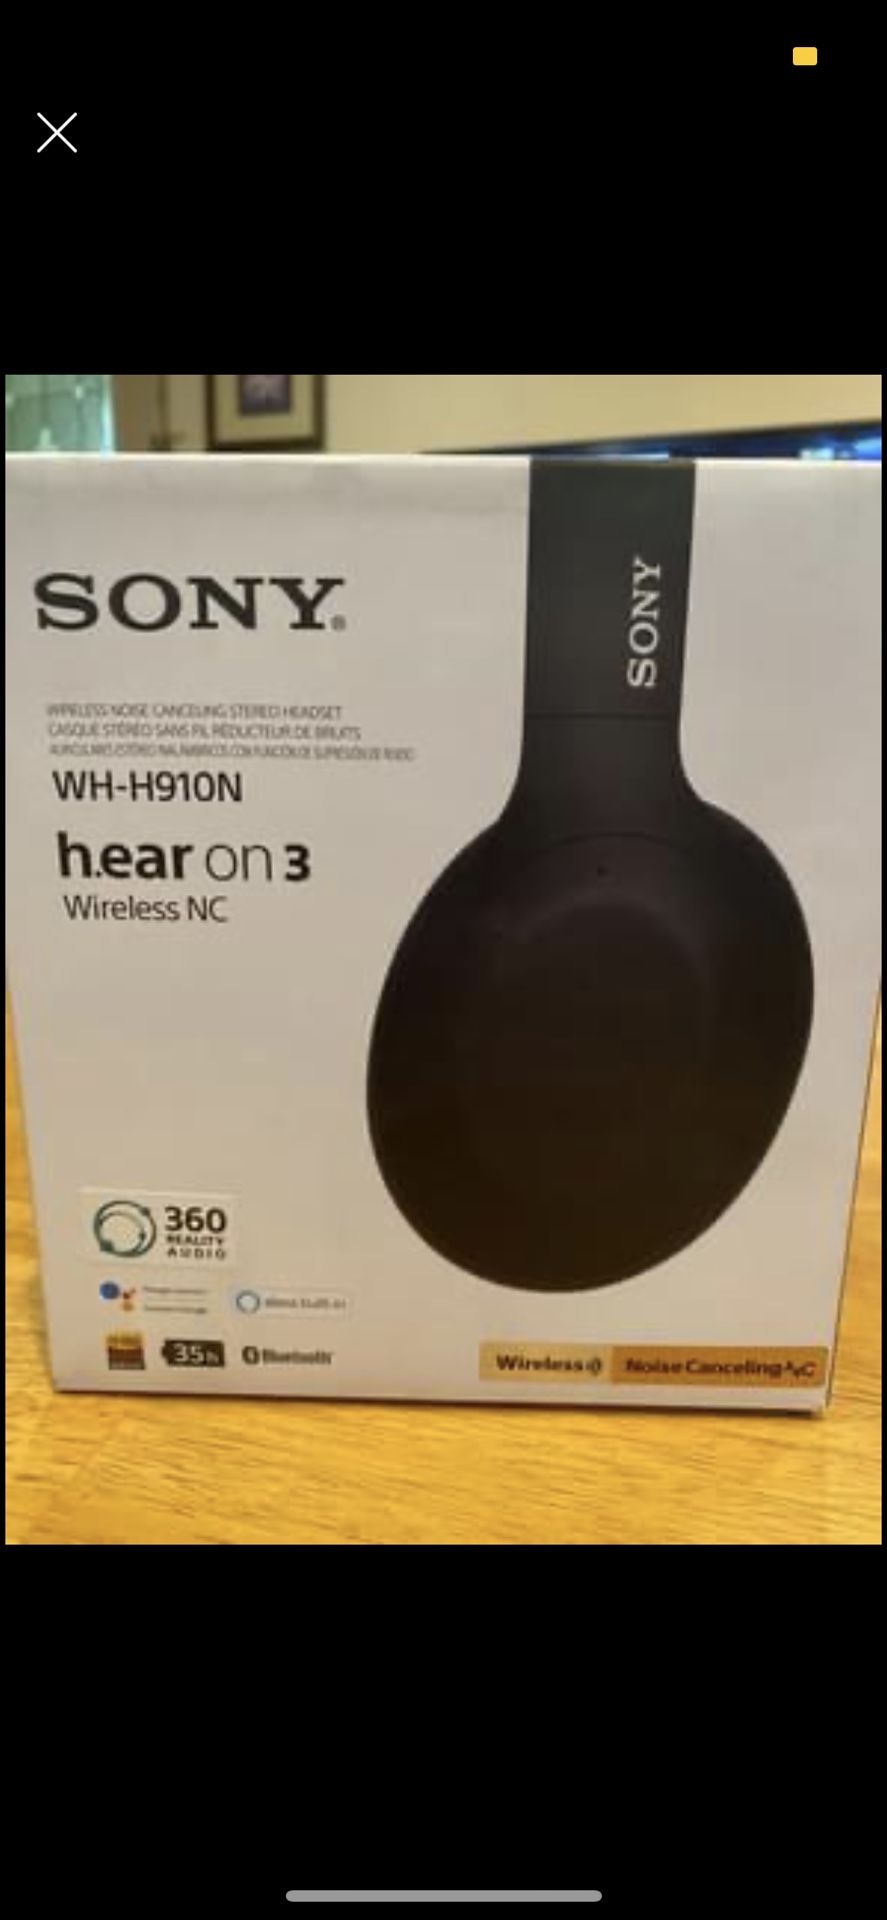 Sony WH-H910N h.ear on 3 Bluetooth Noise Canceling Stereo Headphones